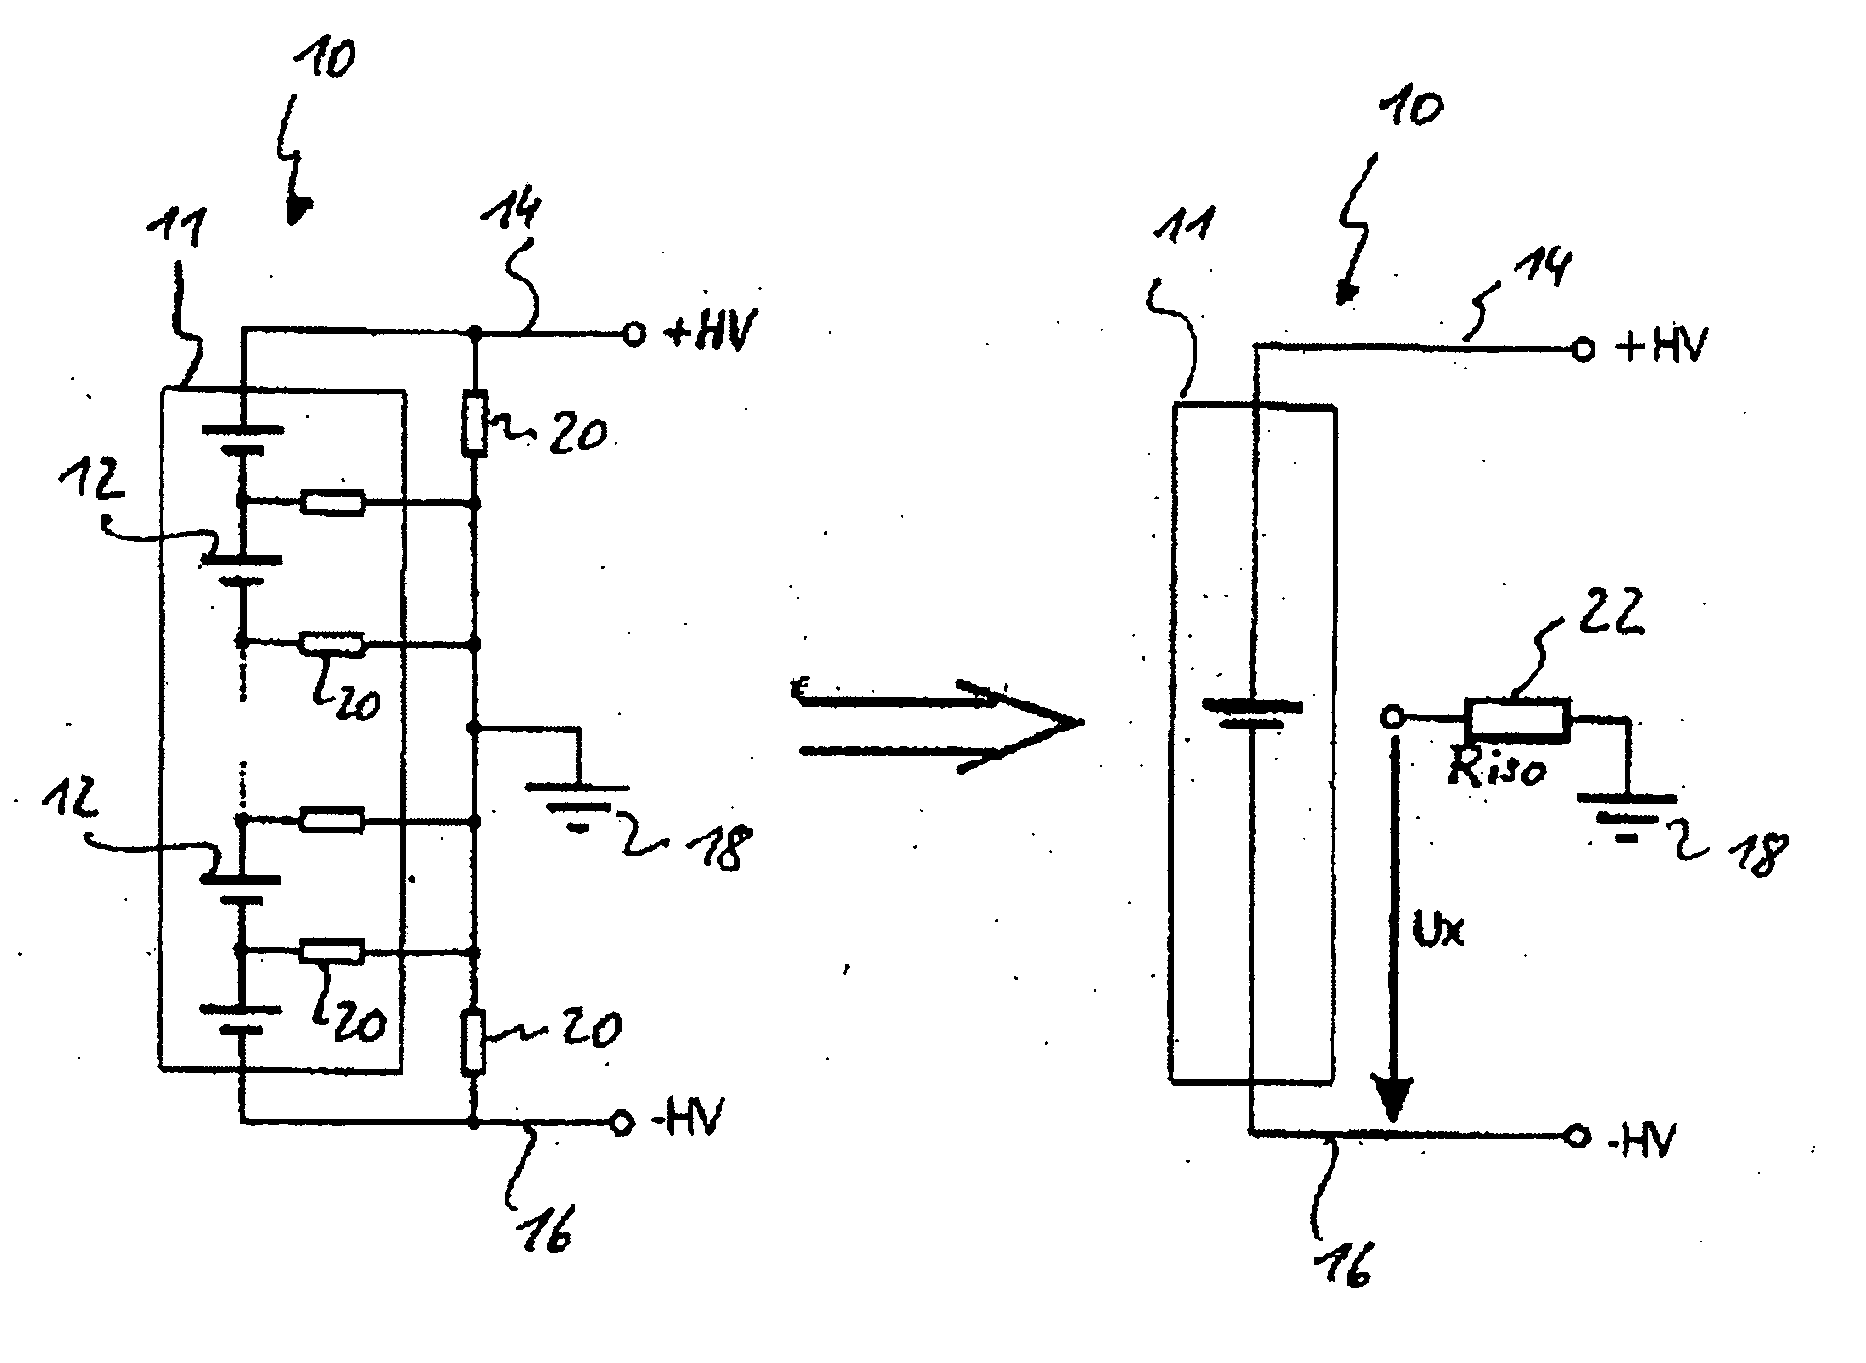 Apparatus and method for measuring the insulation resistance of a fuel cell system